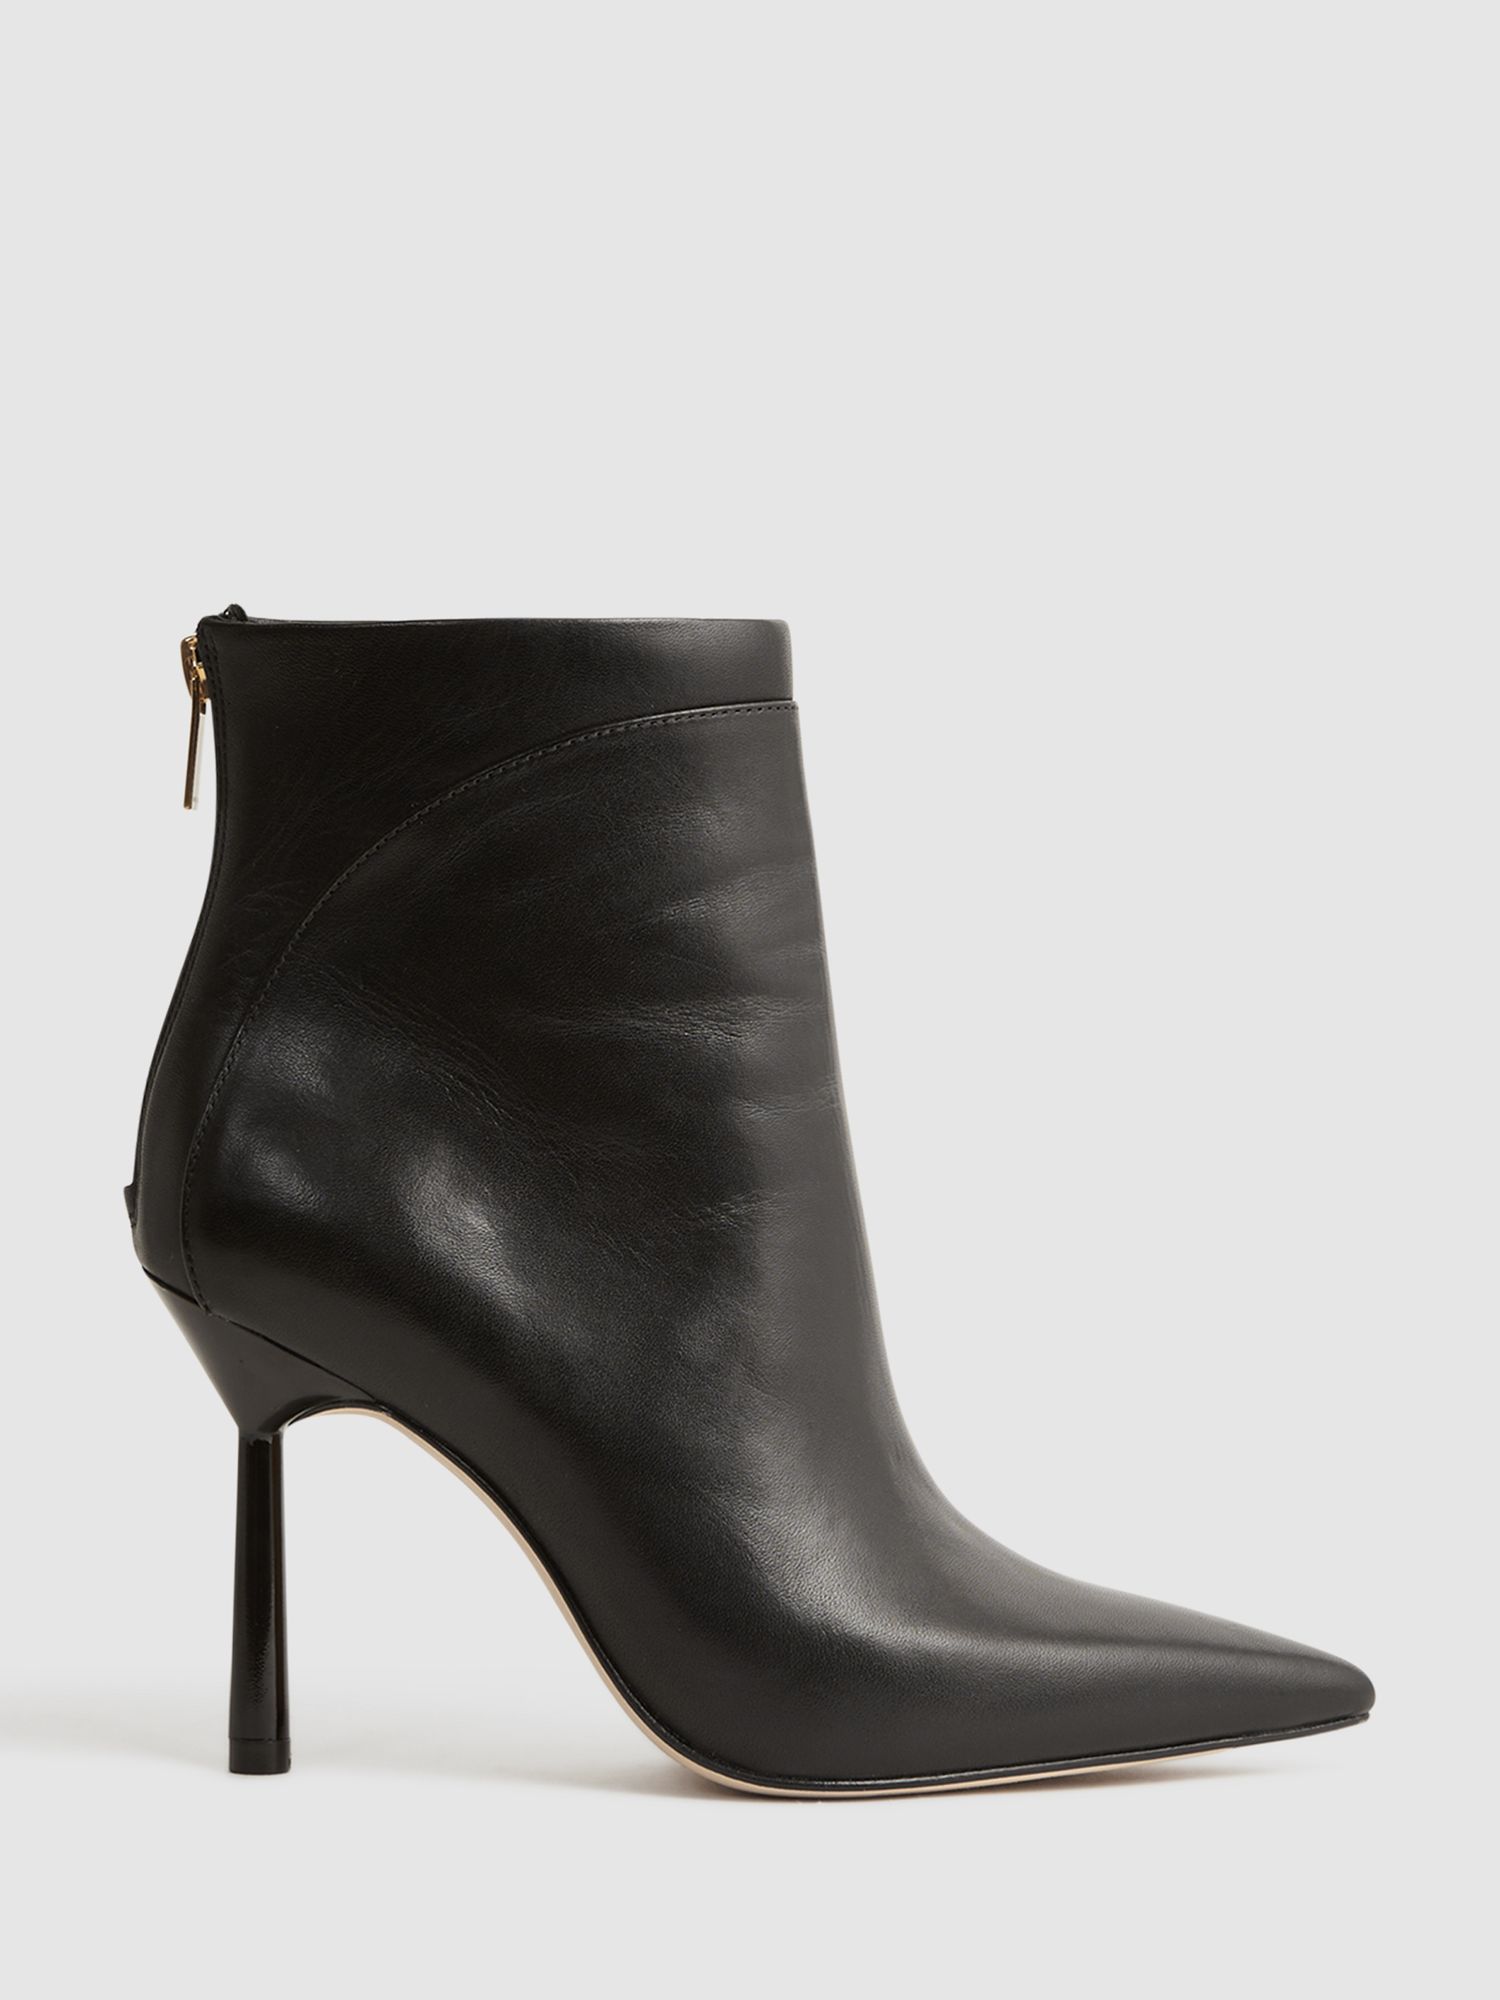 Reiss Lyra Signature Leather Stiletto Ankle Boots, Black, 7